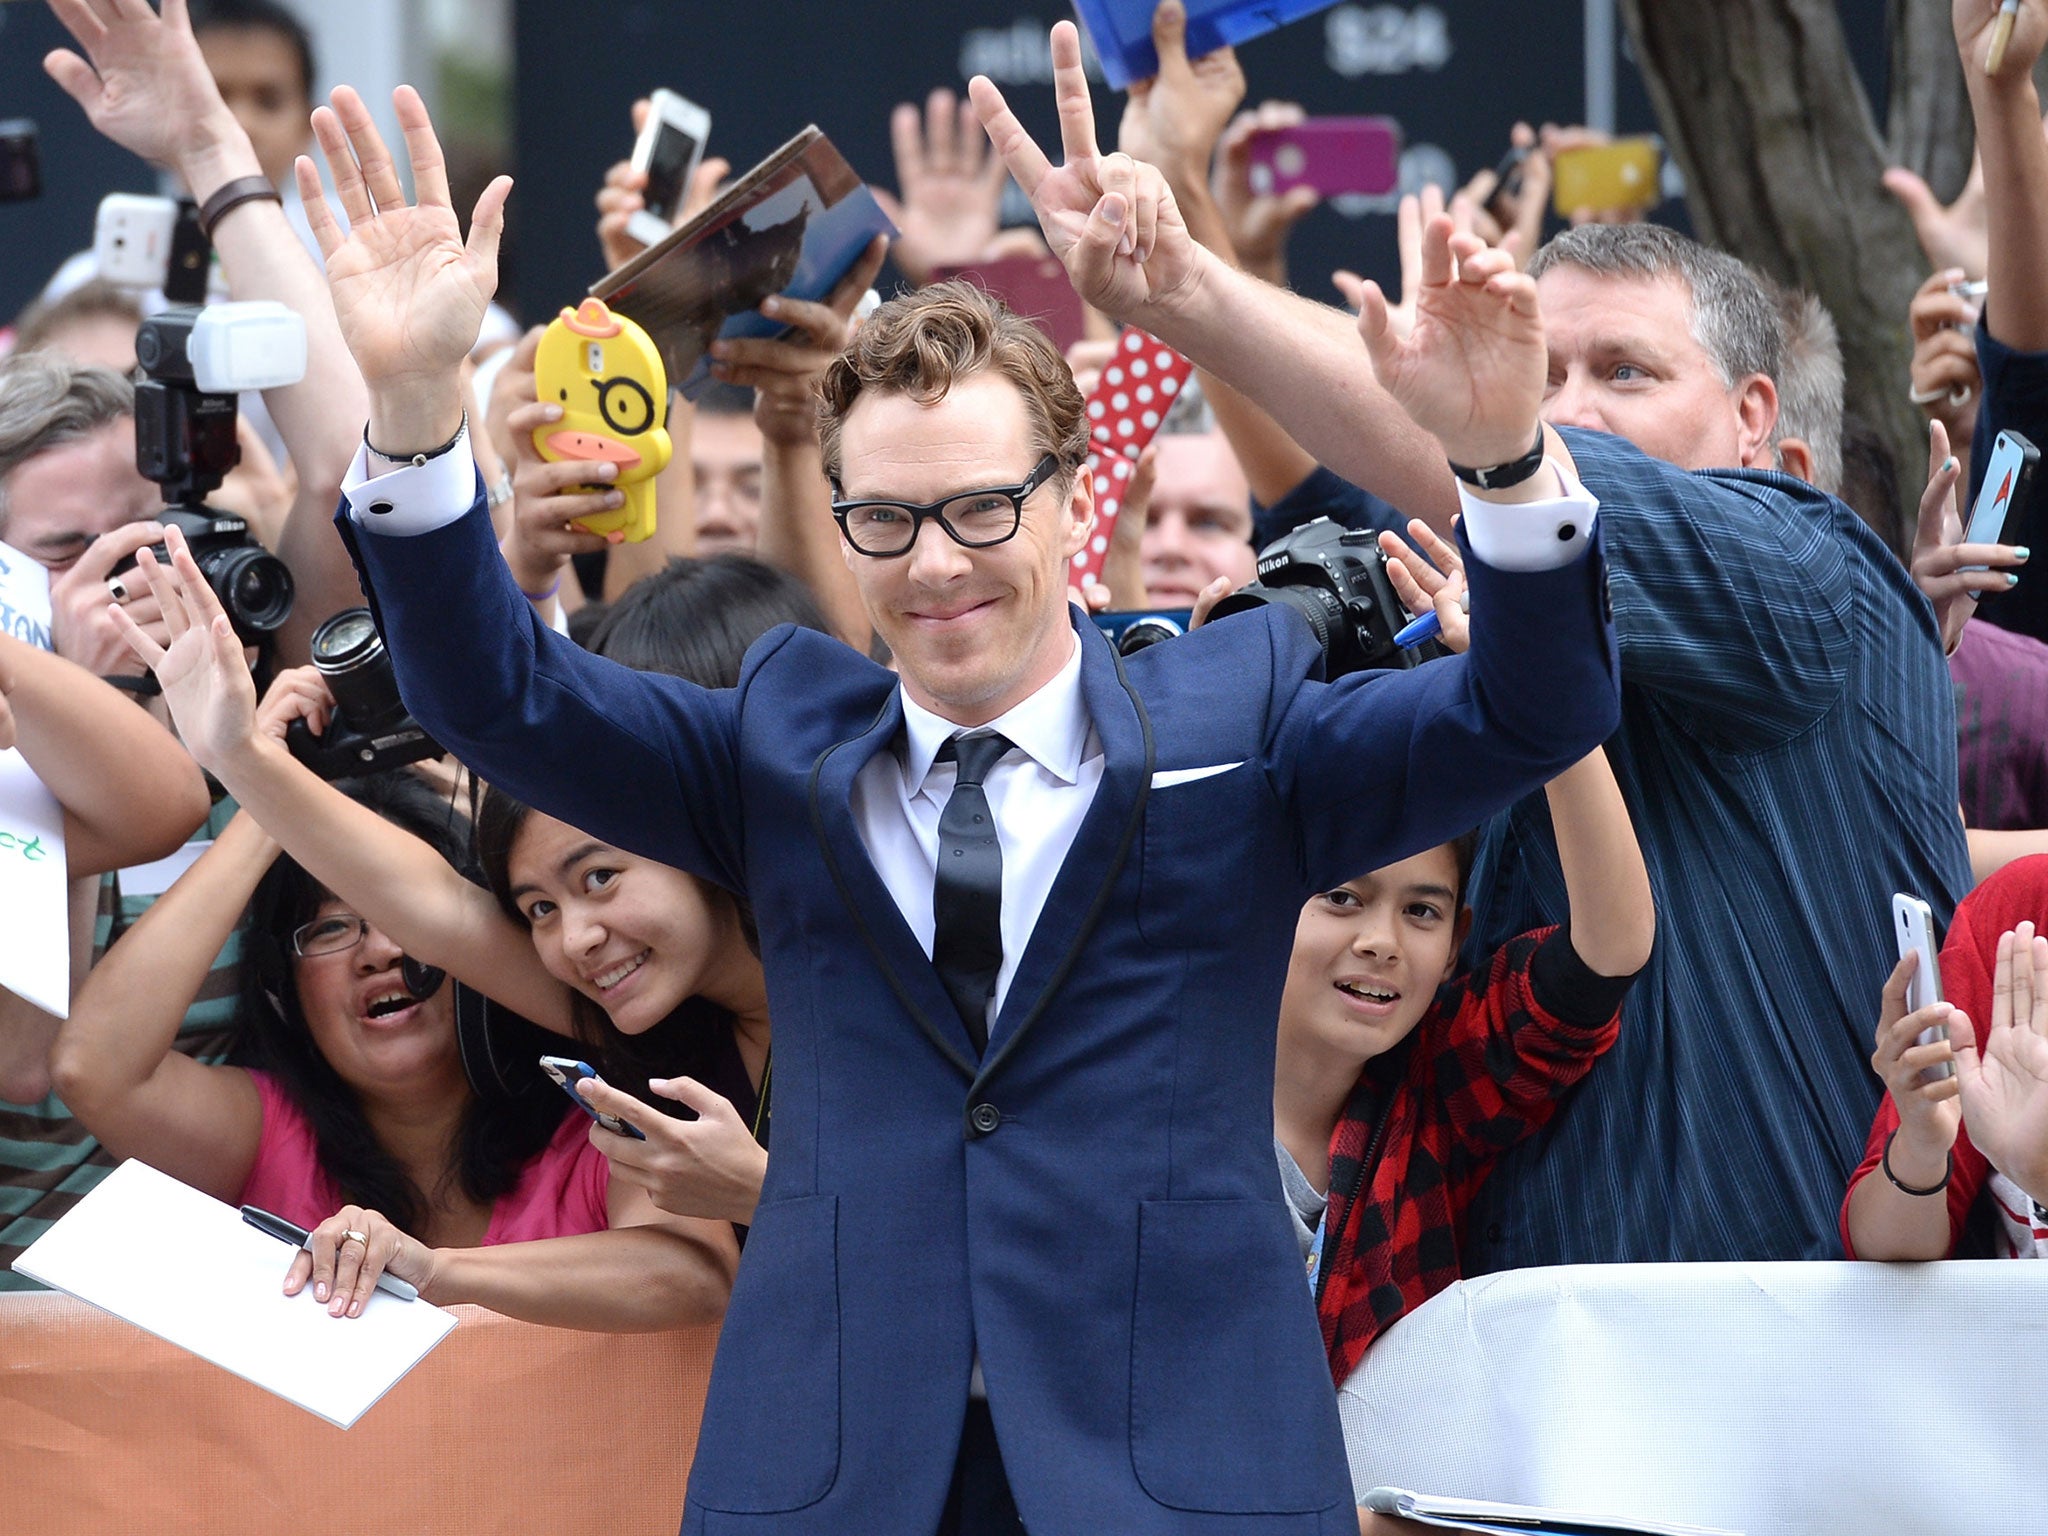 Benedict Cumberbatch attends The Imitation Game premiere at the Toronto Film Festival 2014